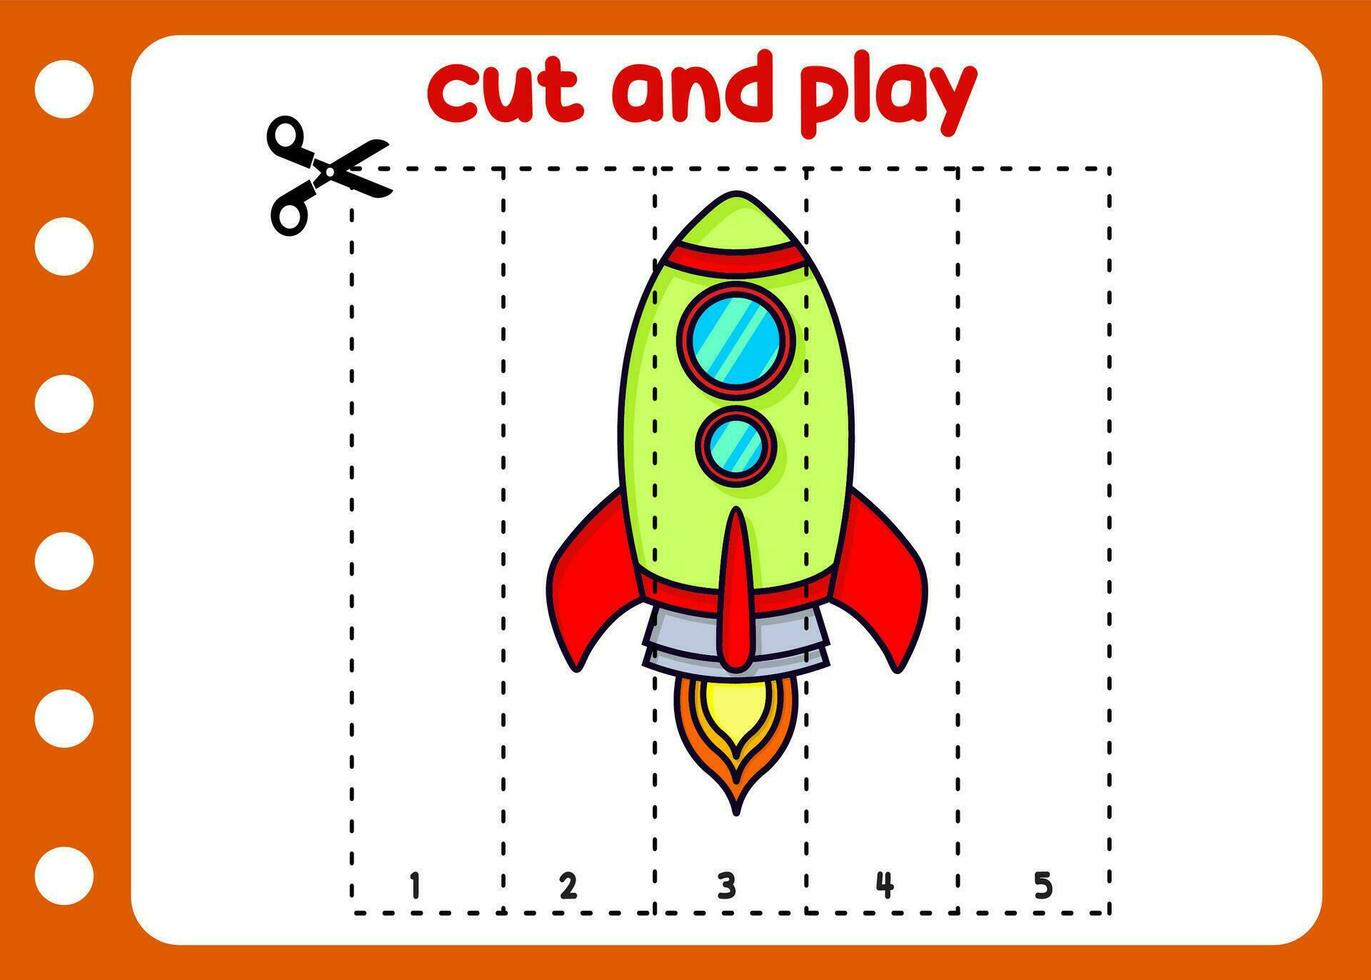 cut and play the rocket. puzzle game for kids vector